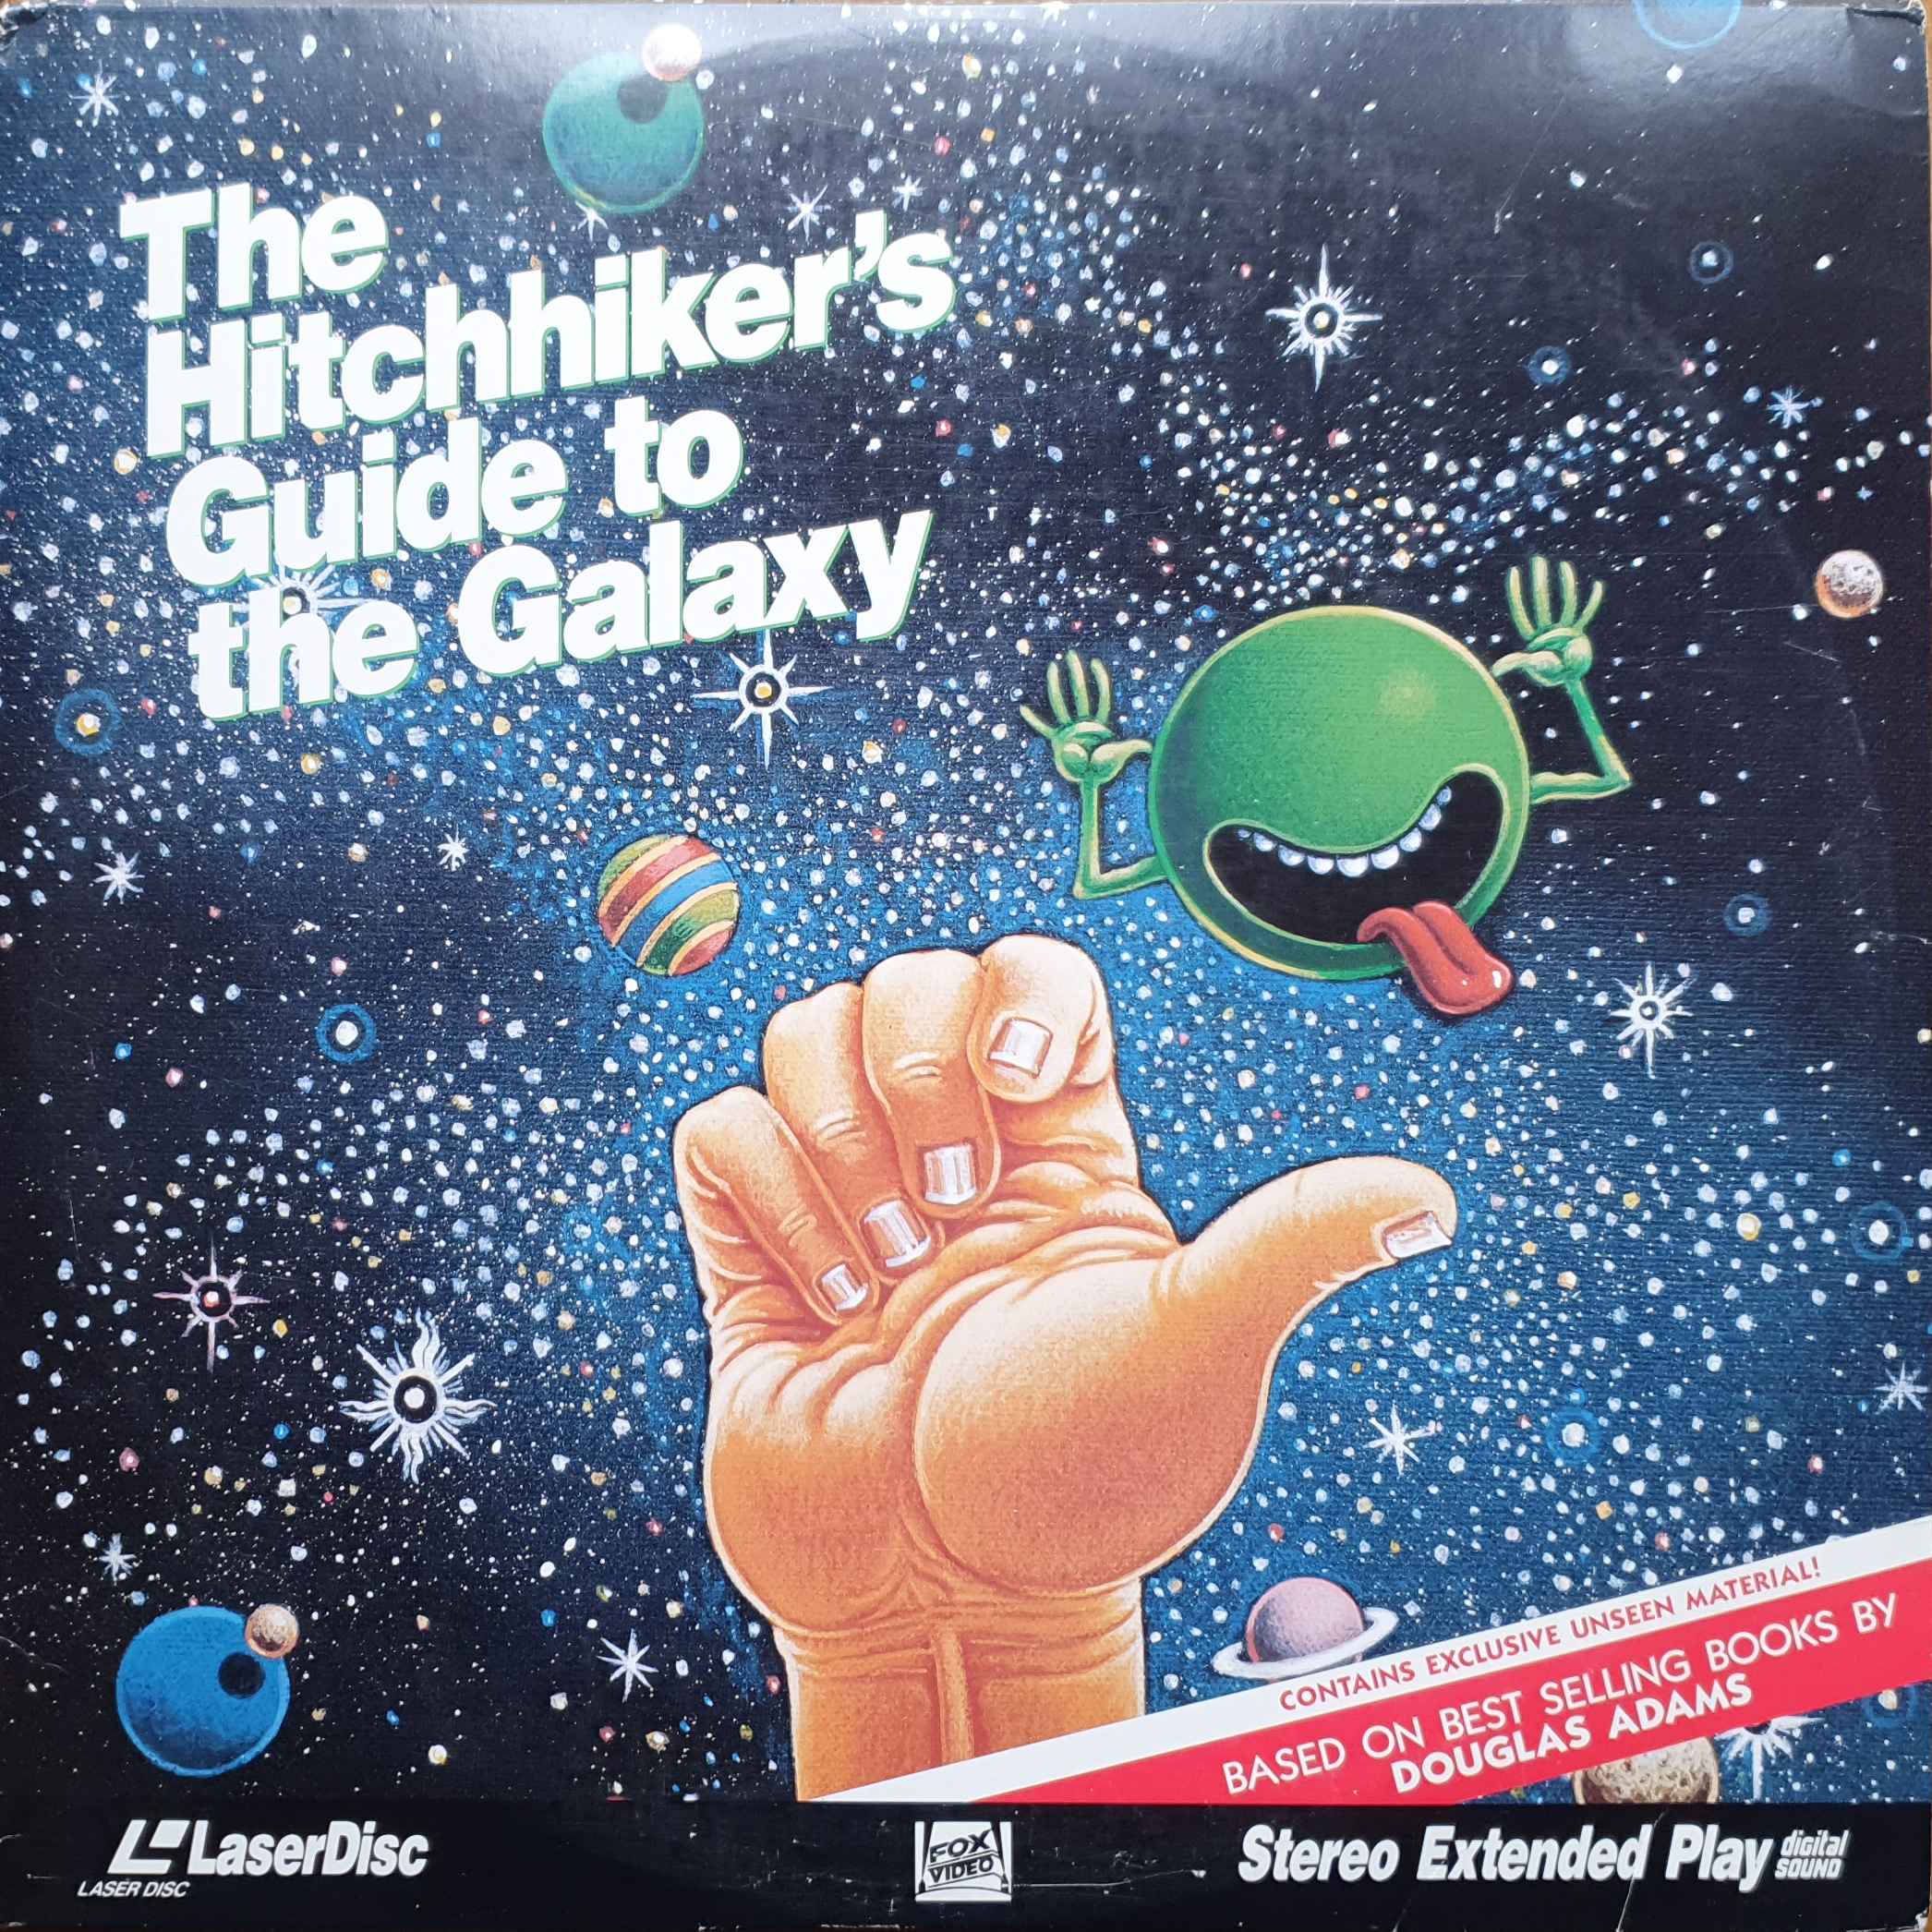 Picture of The hitchhiker's guide to the galaxy by artist Douglas Adams from the BBC anything_else - Records and Tapes library